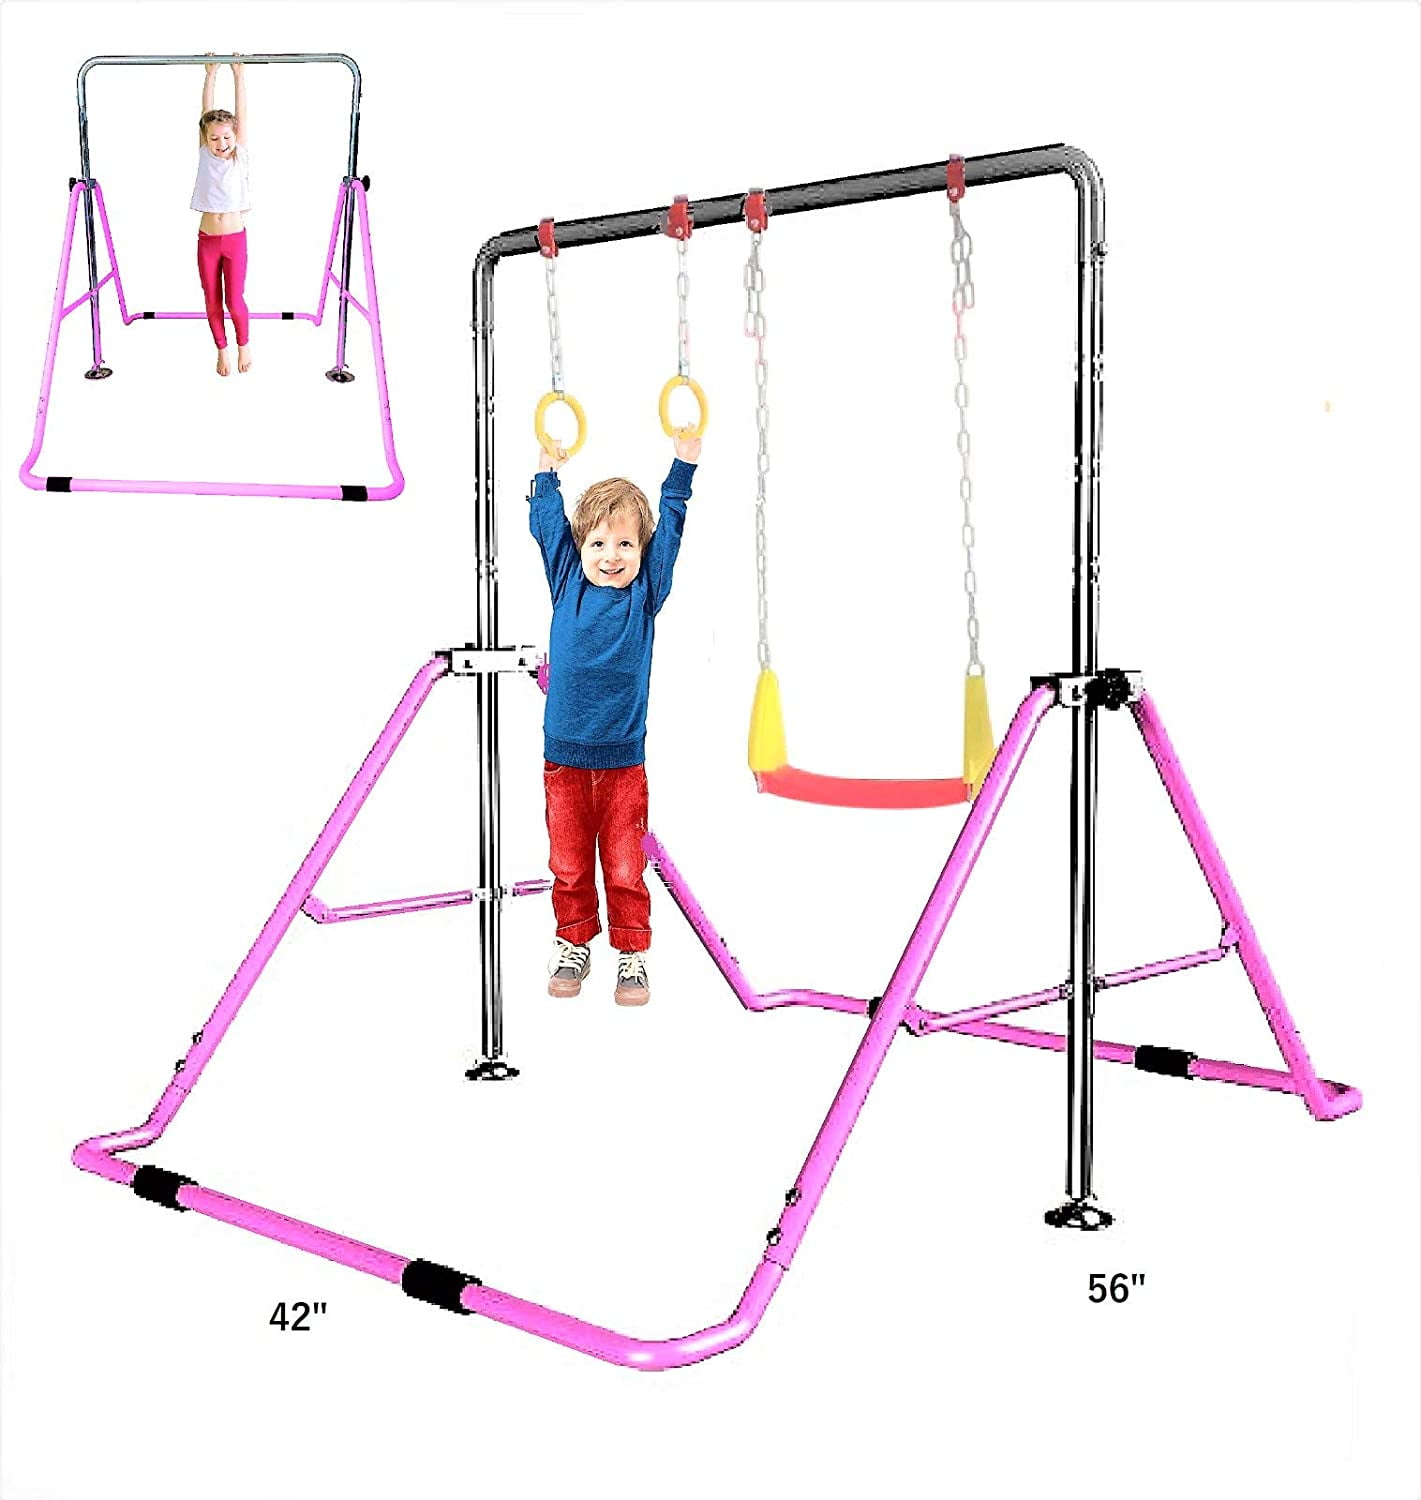 Trapeze Rings Playground Playset Horziontal Gymnastics Monkey Bars Expandable Junior Training Bar Foldable w Stretch Band ToyKraft 3 in 1 Kids Jungle Gym Gymnastics Kip Bar Junior Training Deluxe Swing